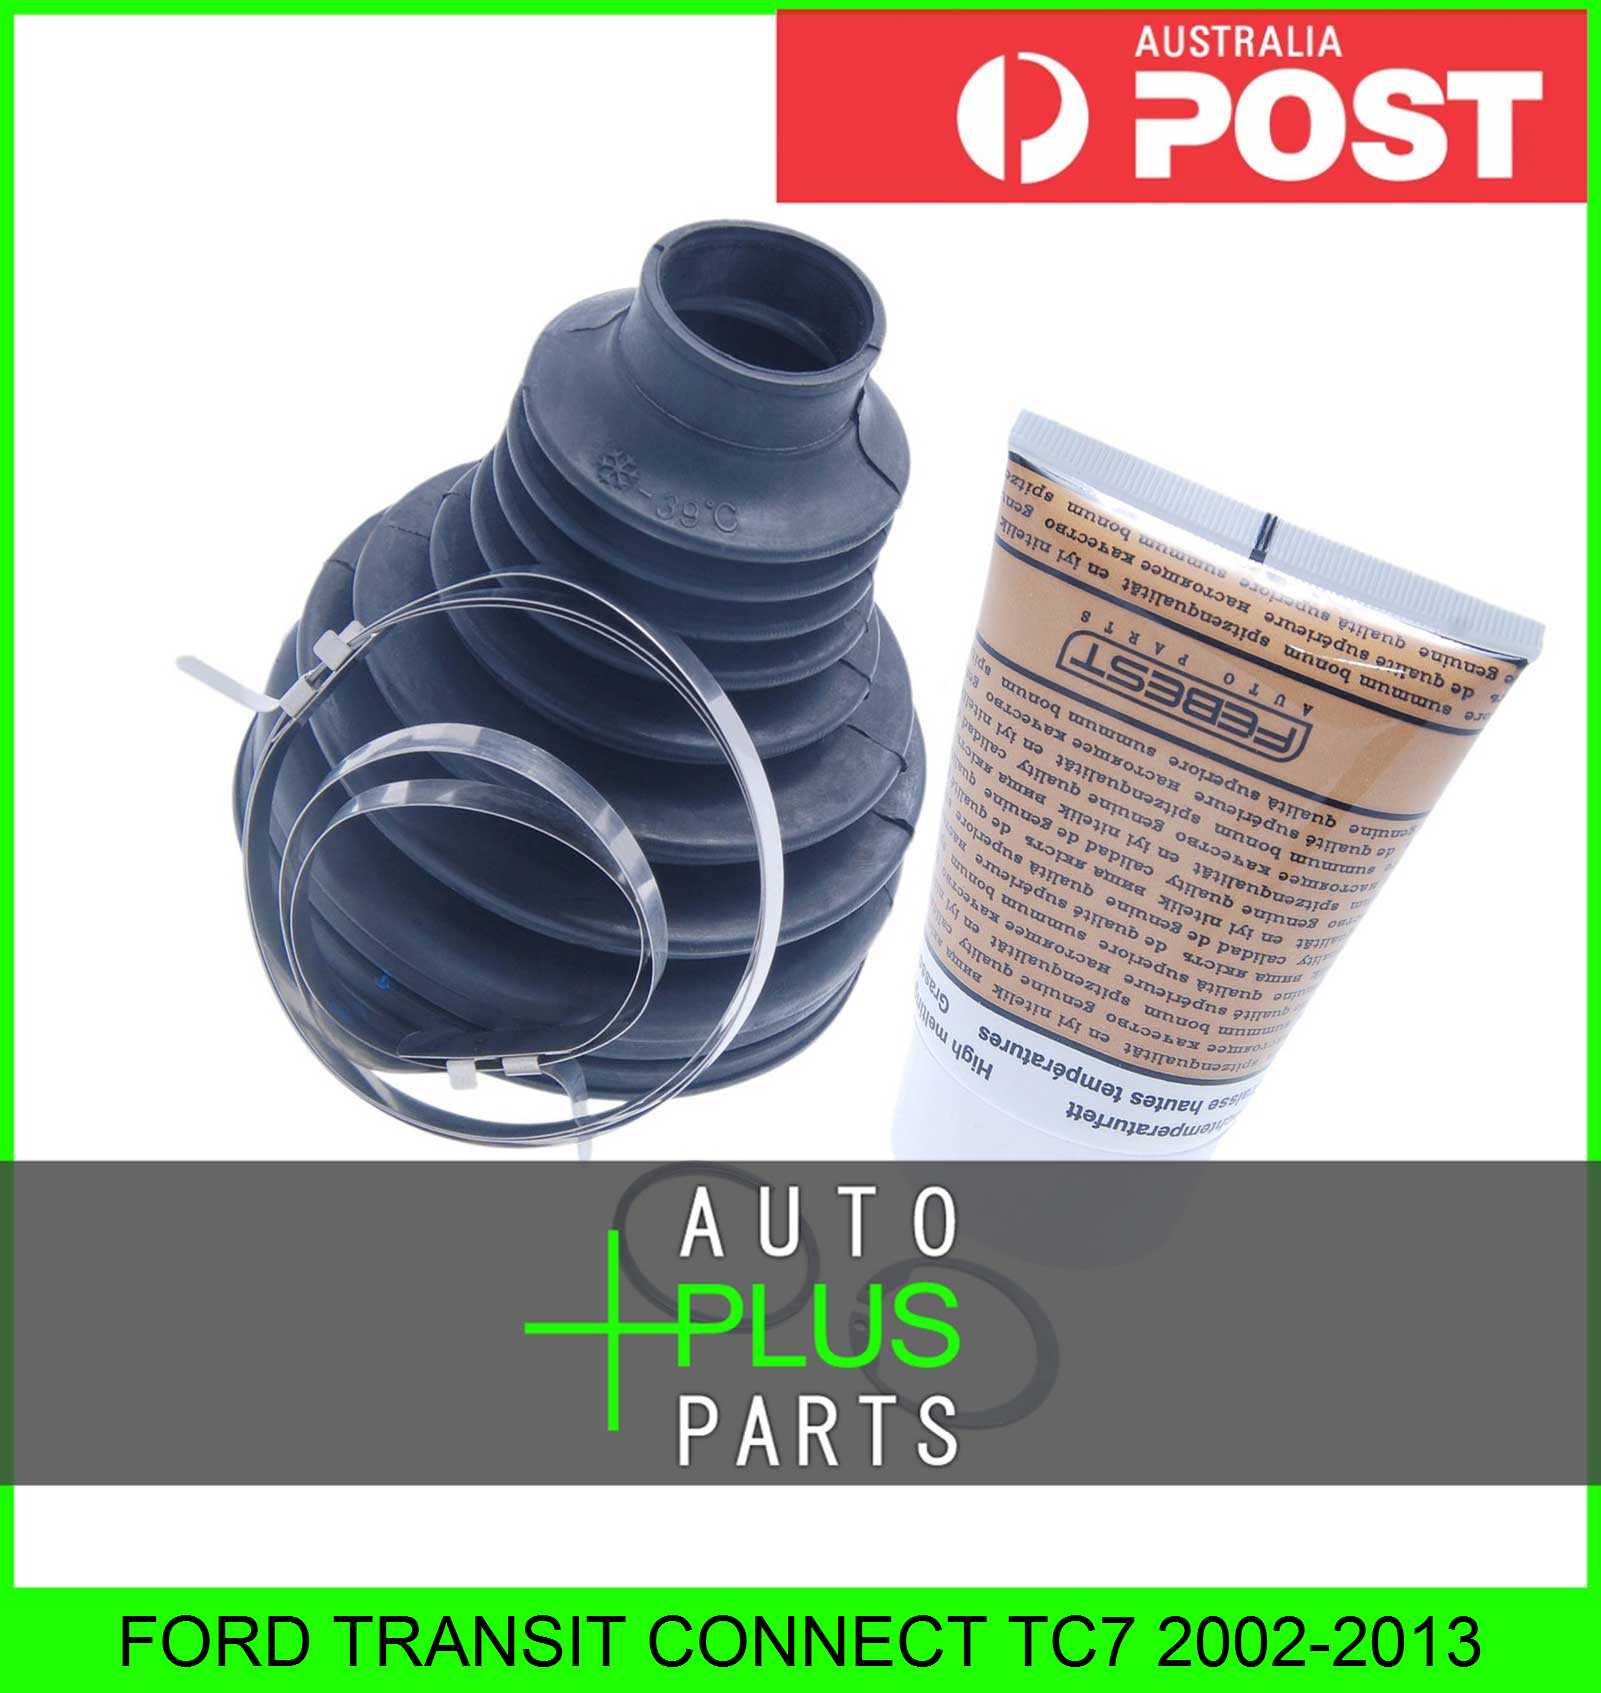 Fits FORD TRANSIT CONNECT TC7 Boot Inner Cv Joint Kit 84.5X111X27.5 | eBay